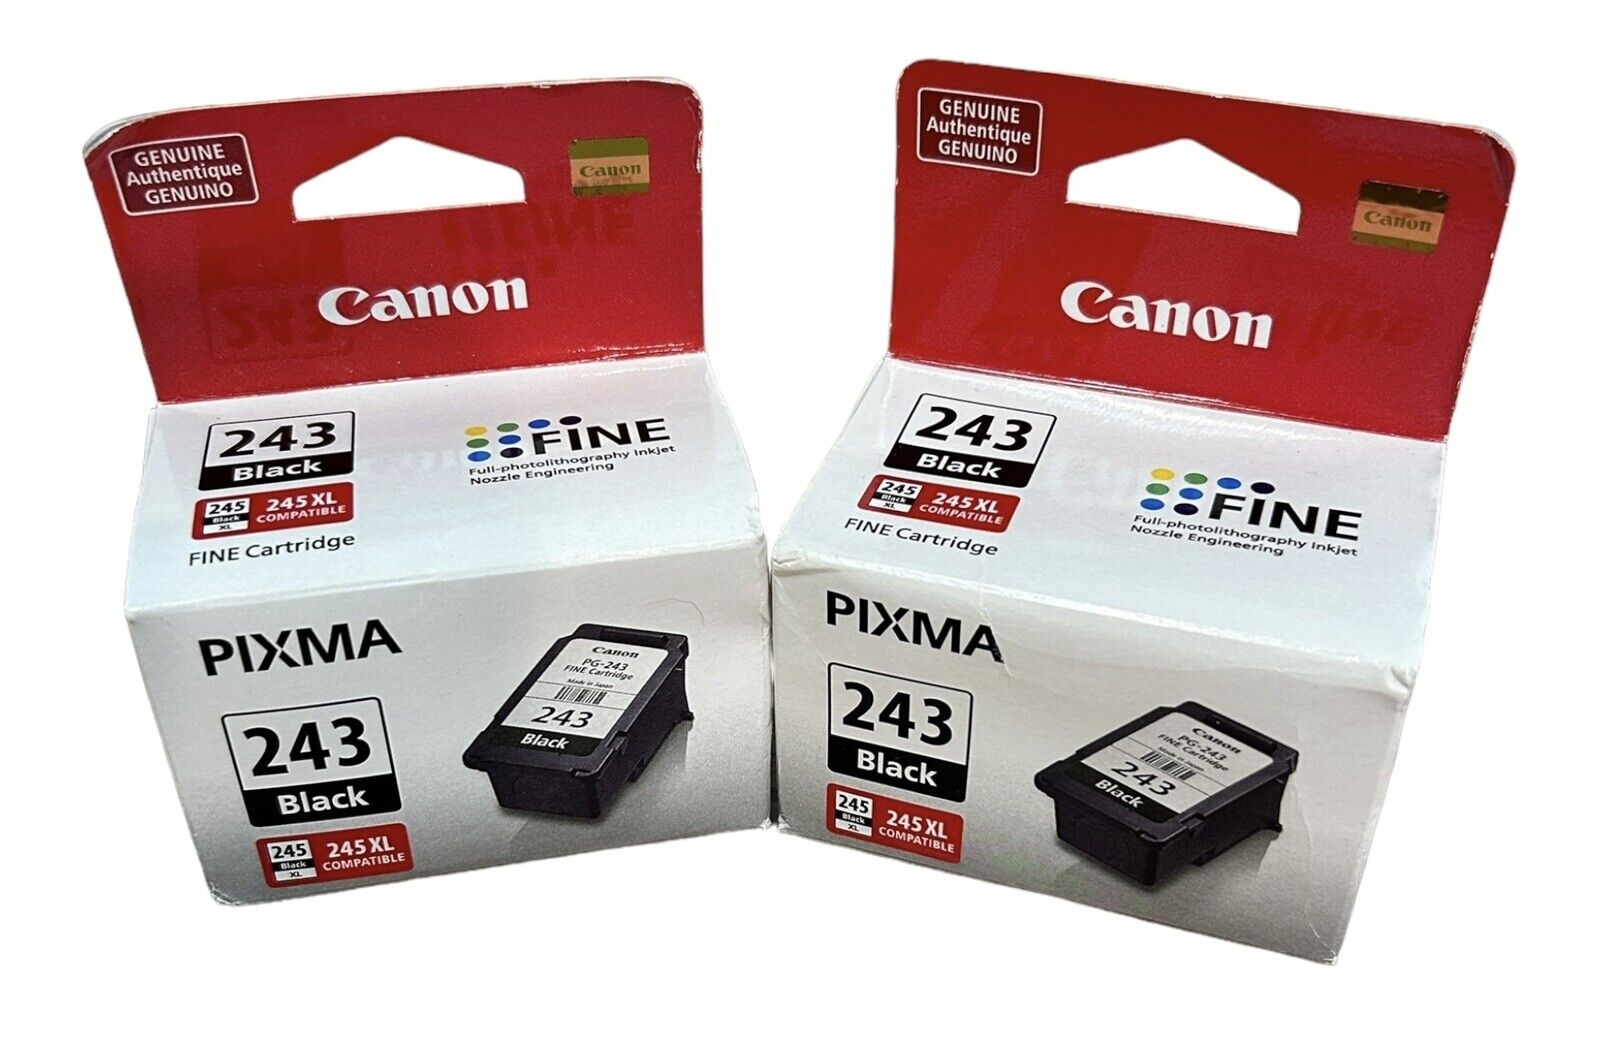 GENUINE Canon PIXMA 243 PG-243 Black Ink Cartridge - New and Sealed - Lot Of 2